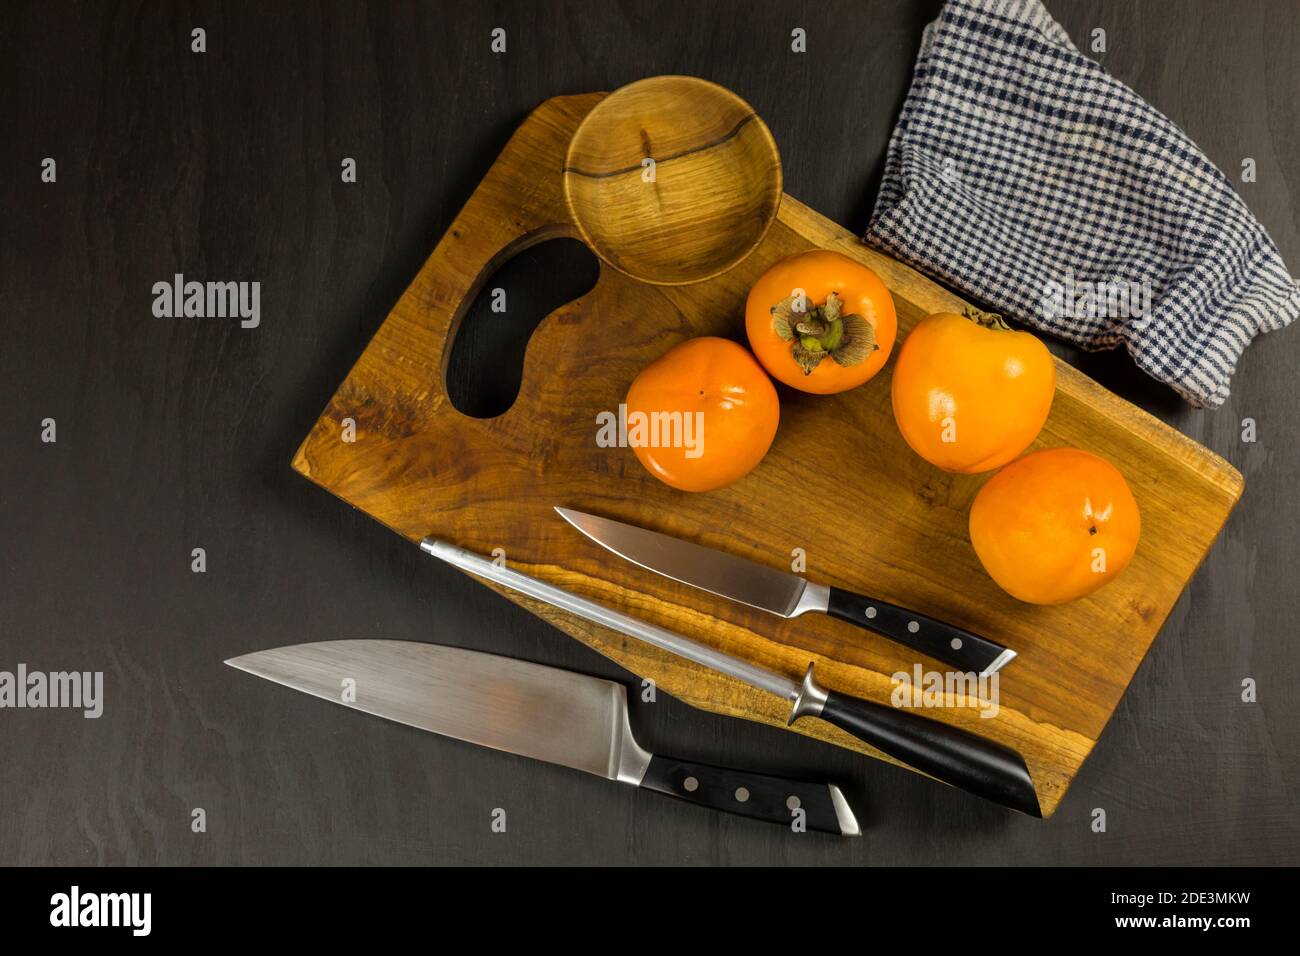 Ripe fresh persimmons on rustic background. Kaki fruit on wooden kitchen table. Slicing fruit on a kitchen board. Stock Photo